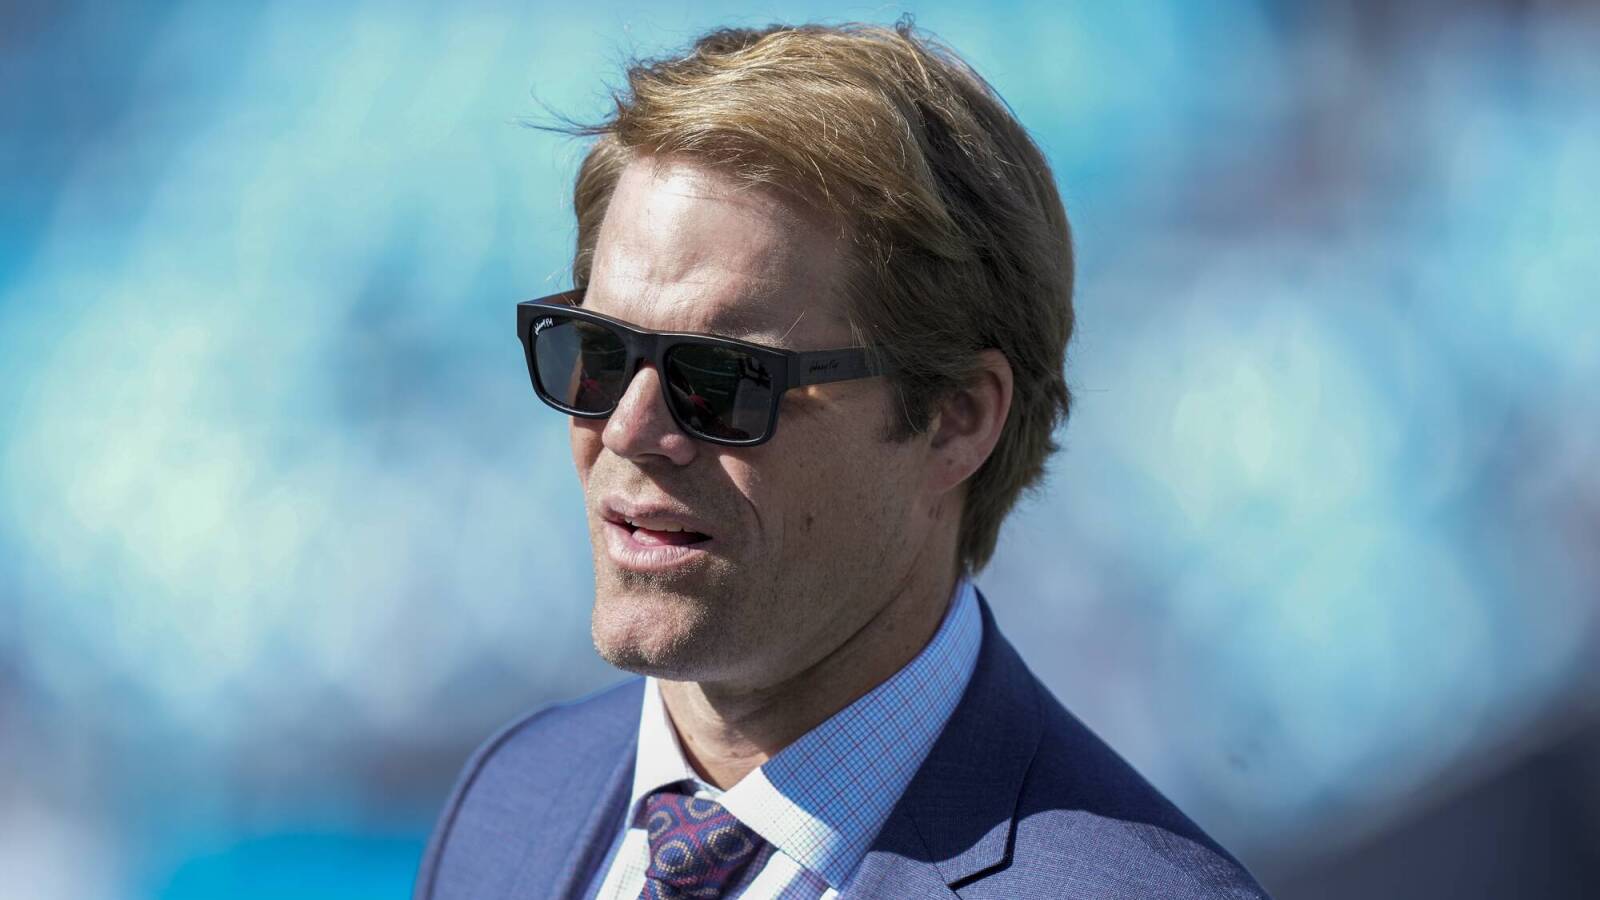 Report details Greg Olsen’s new role at FOX Sports